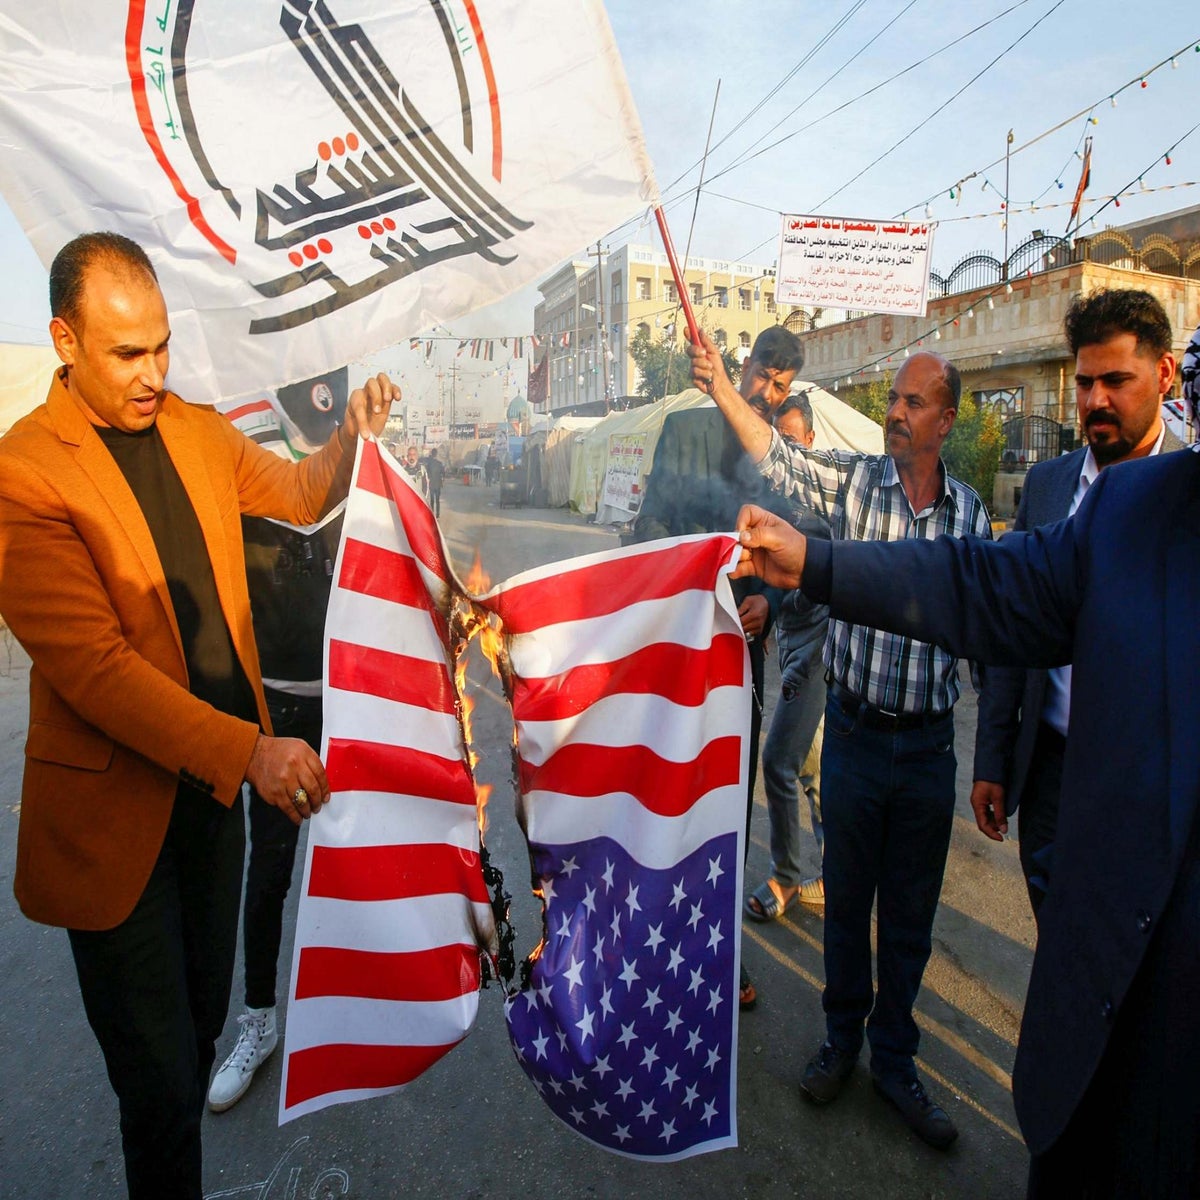 New Iraqi flag meets with public disapproval